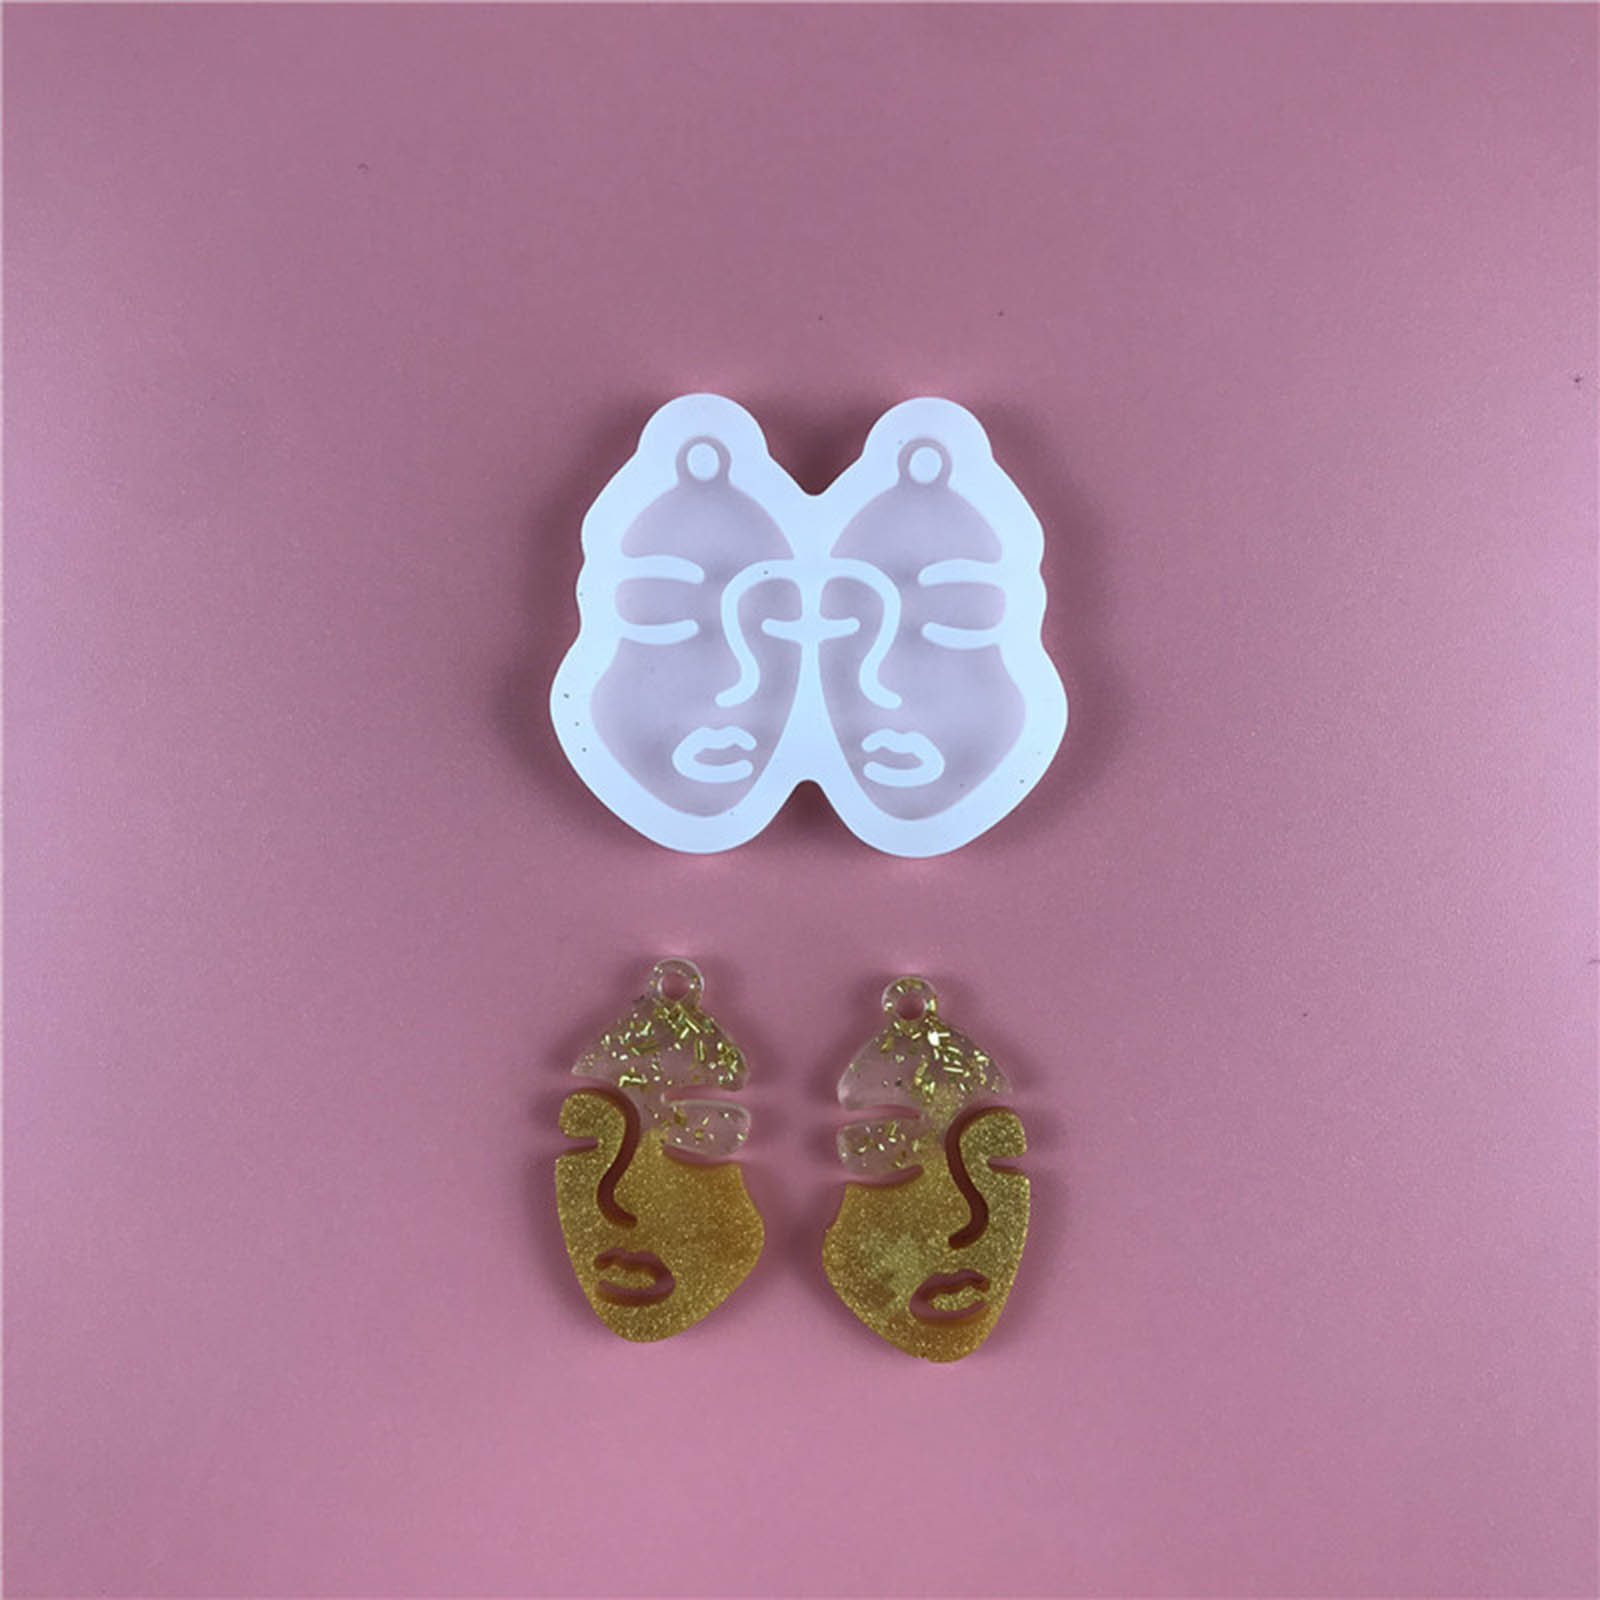 Picture of Silicone Resin Mold For Jewelry Making Earring Pendant Face White 5cm x 4.3cm, 1 Piece